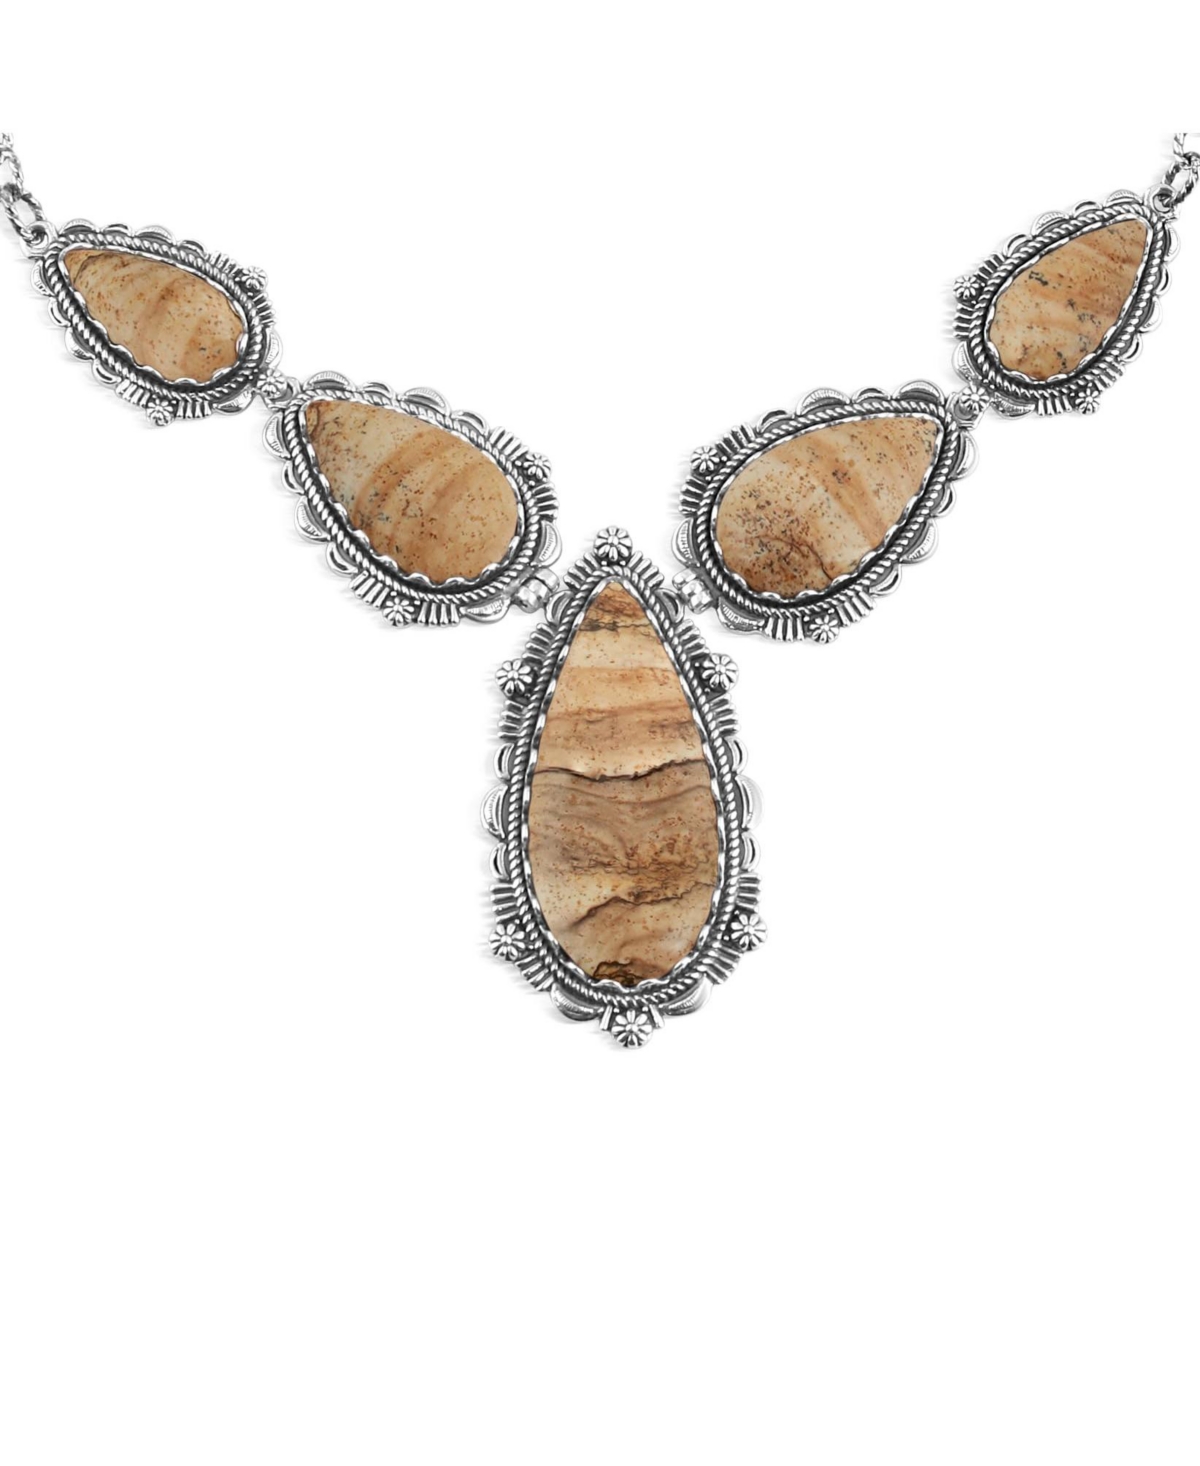 Sterling Silver Women's Statement Necklace with Genuine Pear Shaped Gemstones, 17- 20 Inches - Picture jasper